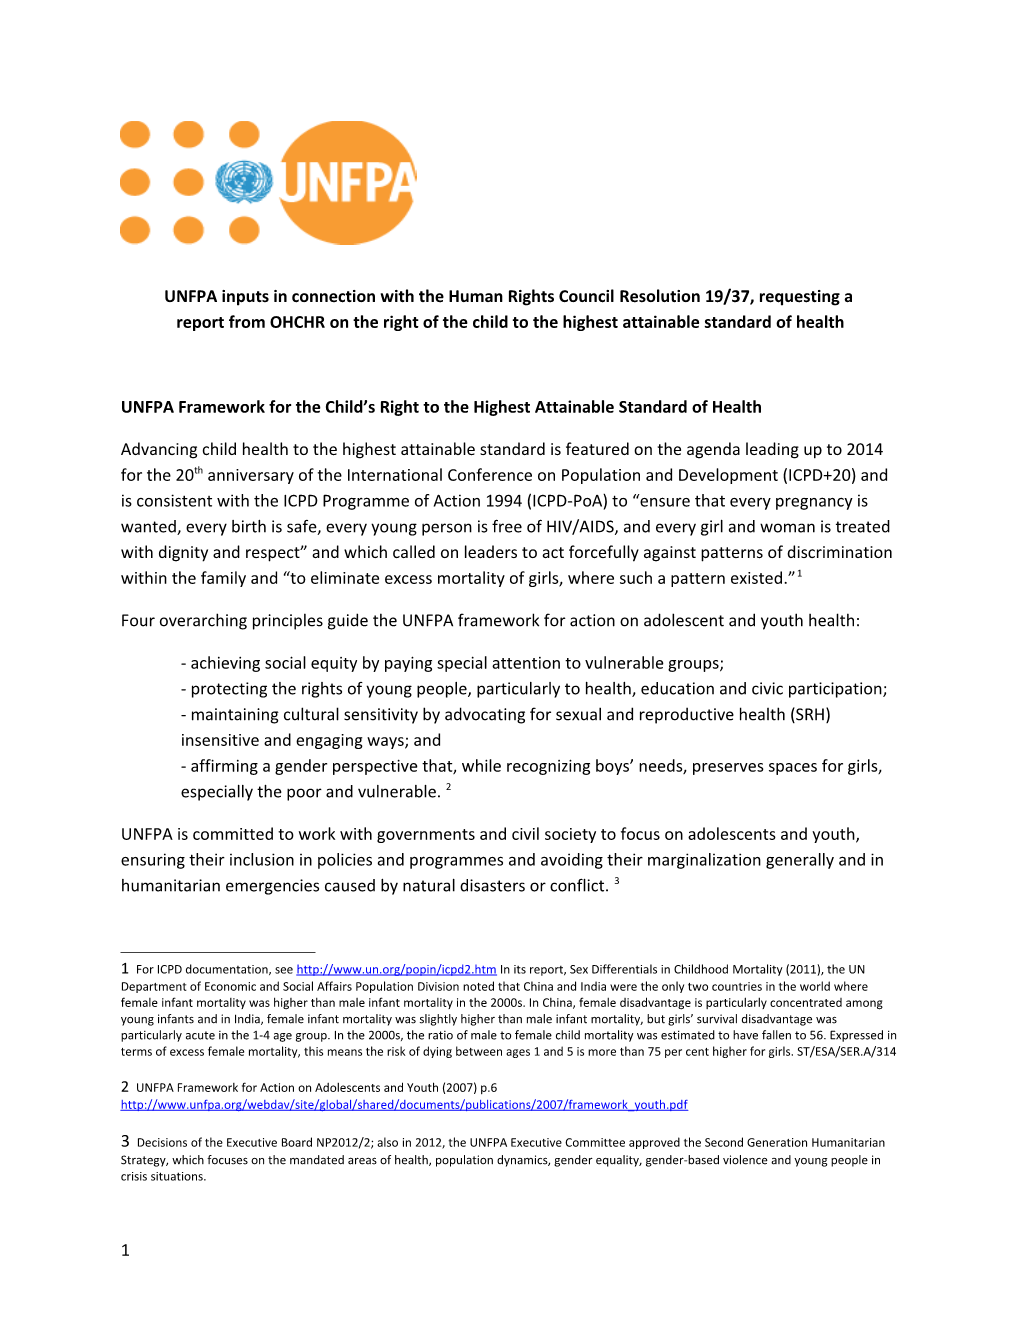 UNFPA Framework for the Child S Right to the Highest Attainable Standard of Health